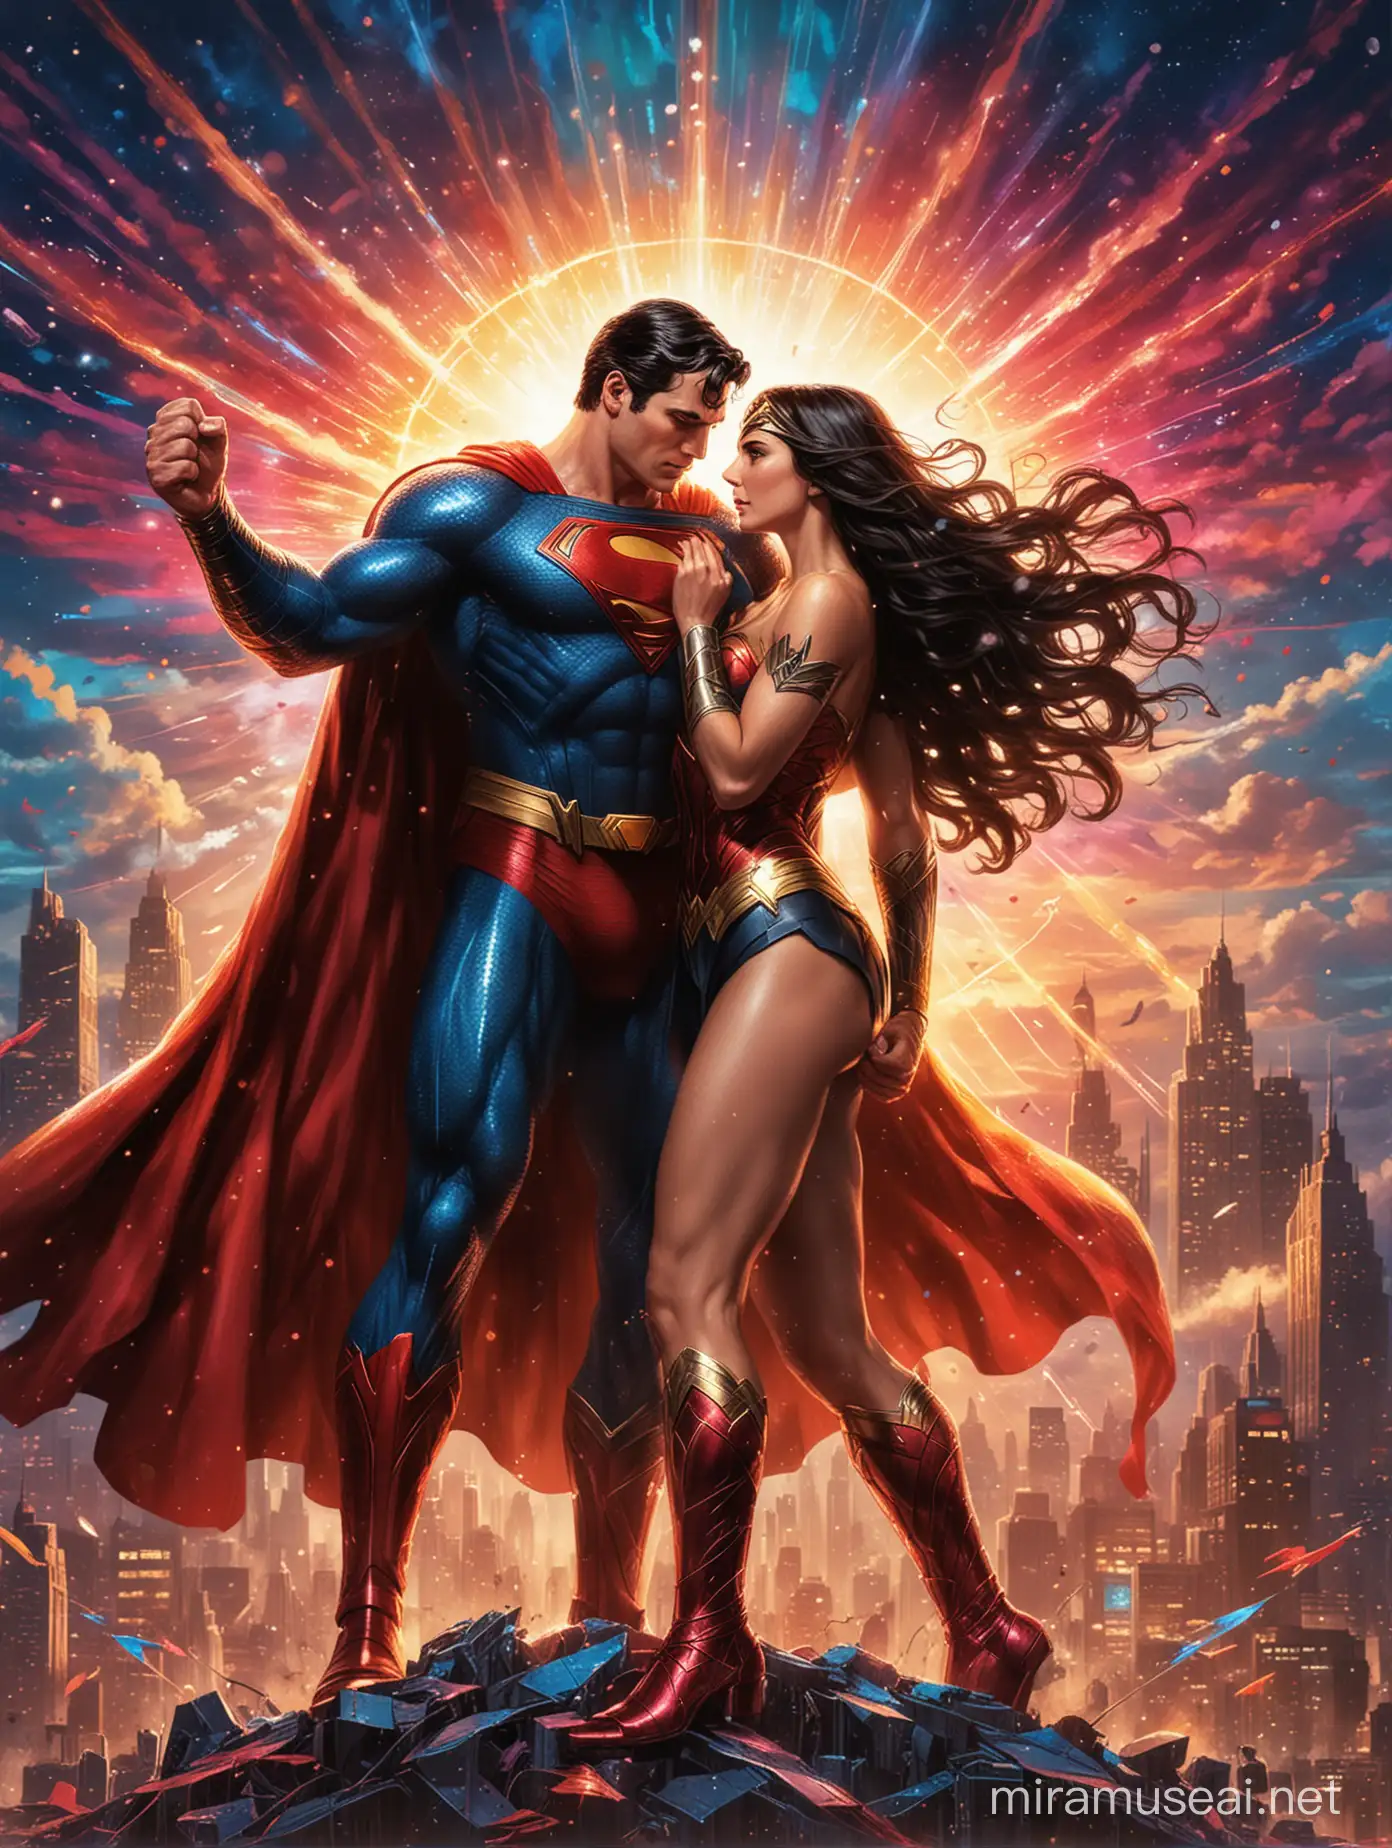 Superman and Wonder Woman in Dynamic Strength and Unity